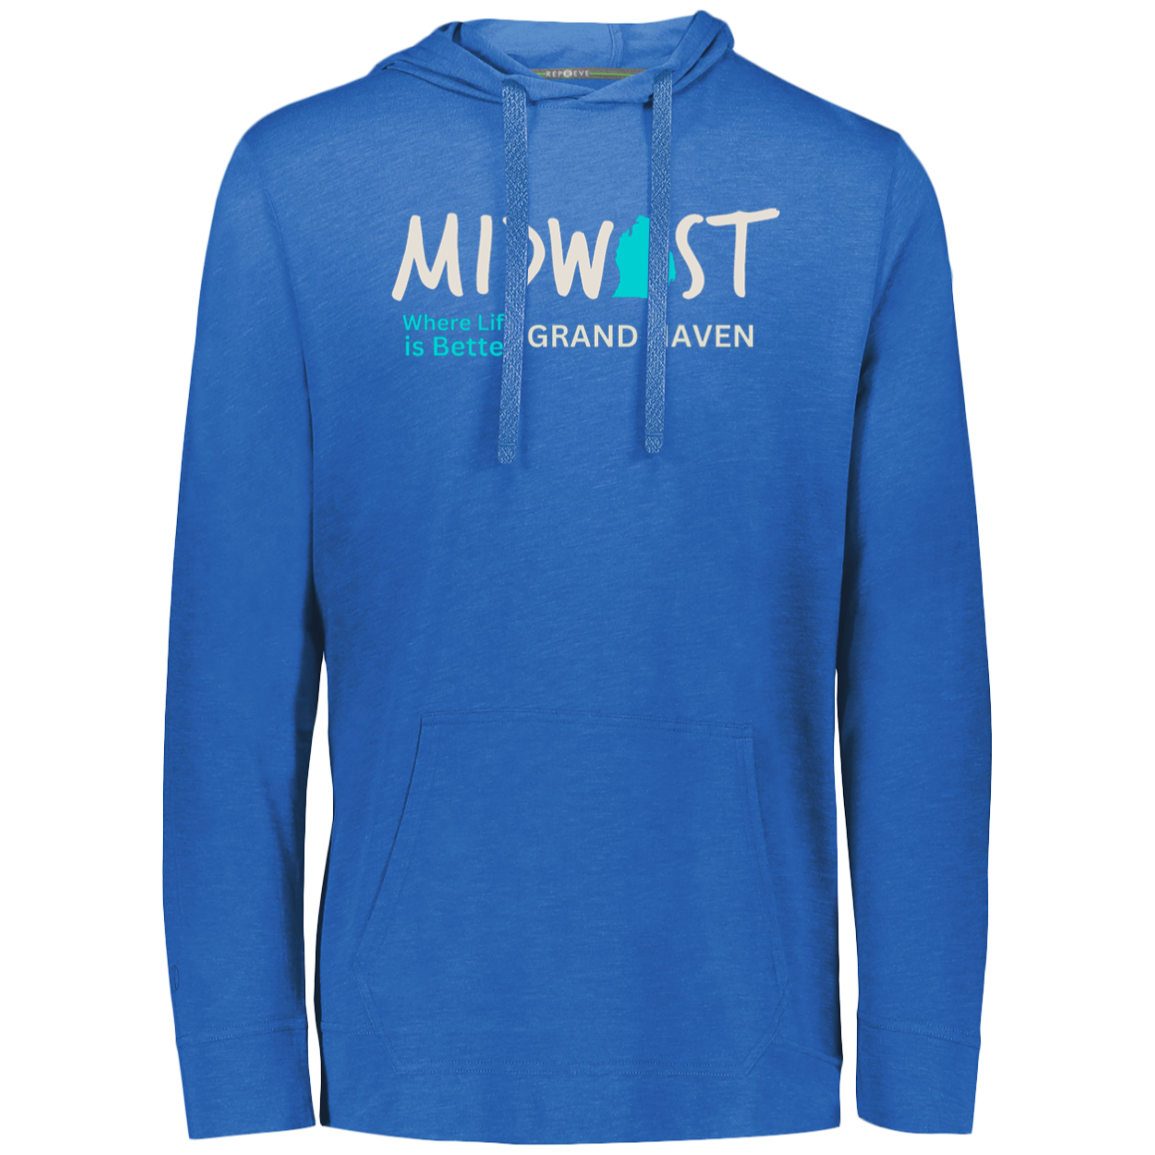 Midwest Where Life is Better Grand Haven Eco Lightweight Hoodie